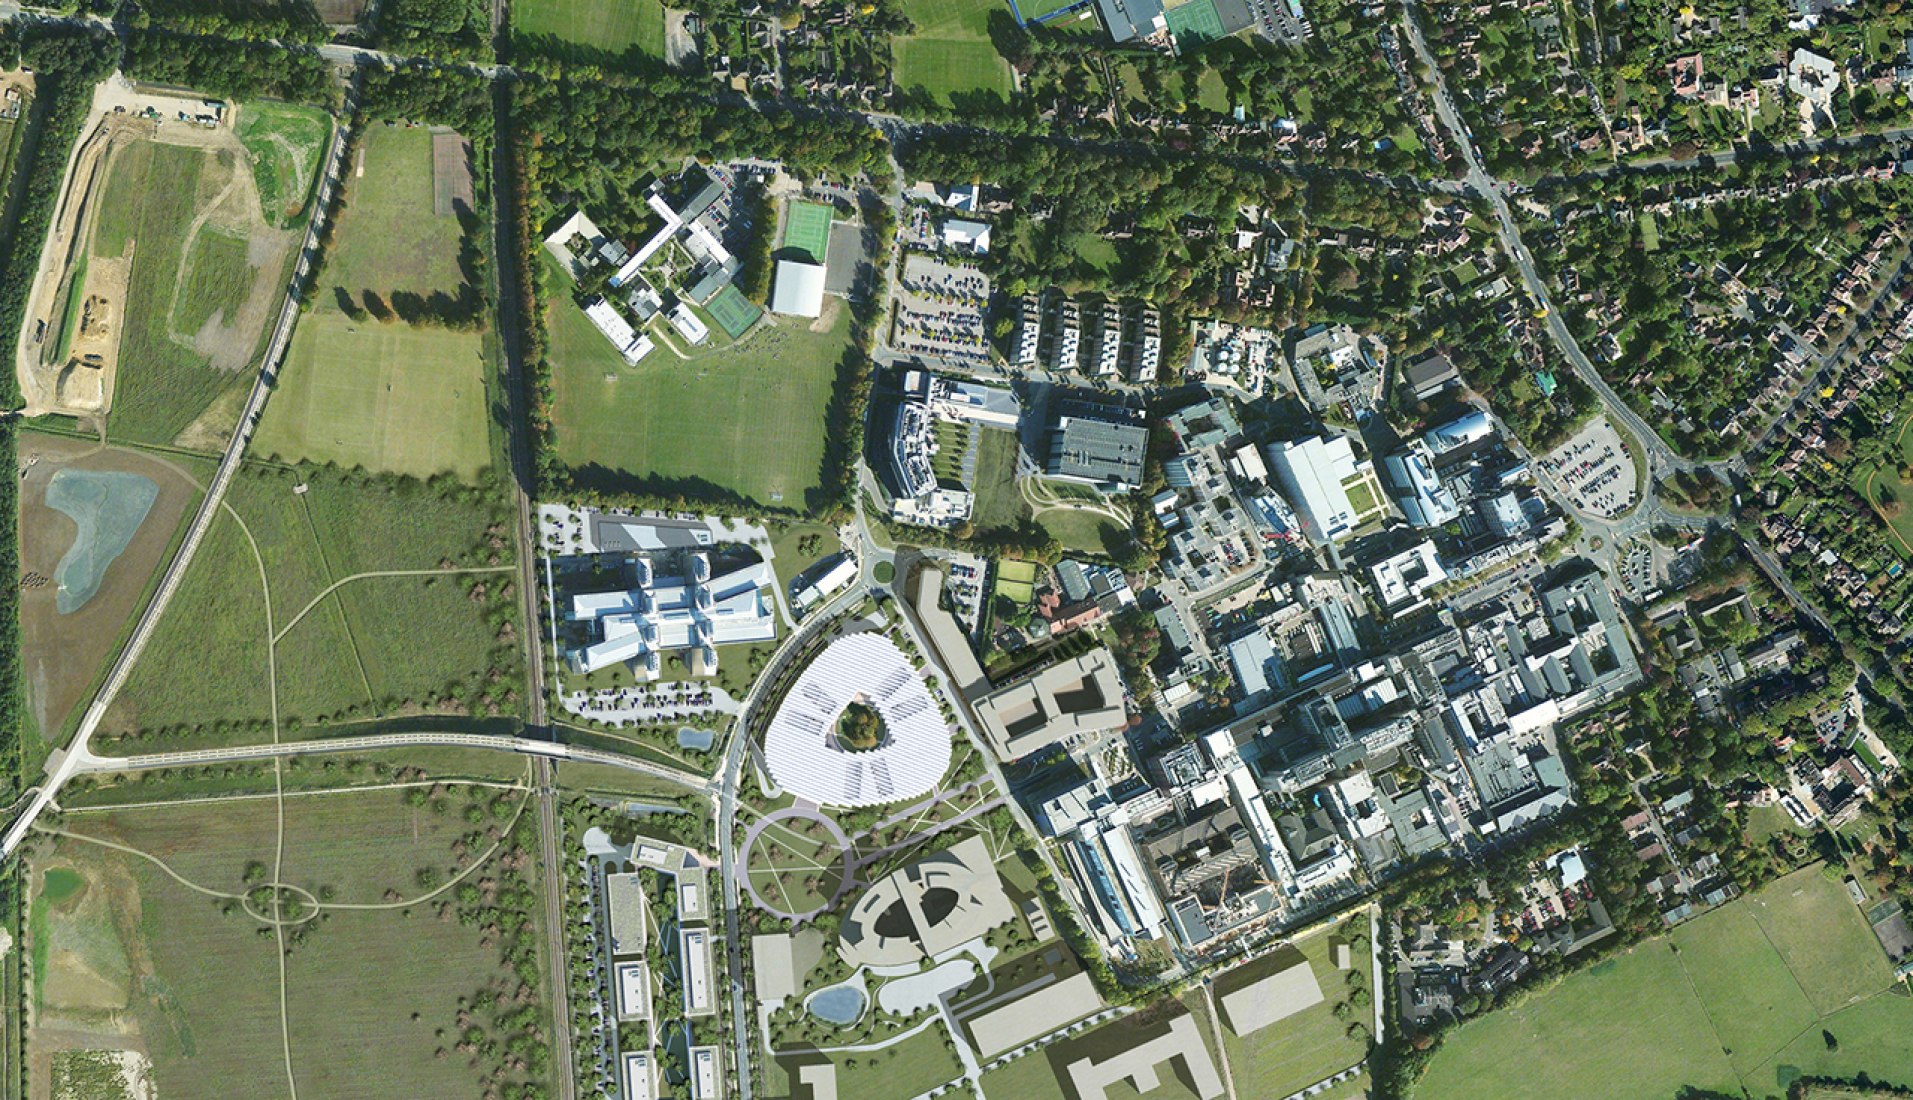 Aerial view. Concept design of AstraZeneca Global R&D centre and corporate HQ, Cambridge, UK – illustration of proposed design, subject to planning consent © Herzog & de Meuron.